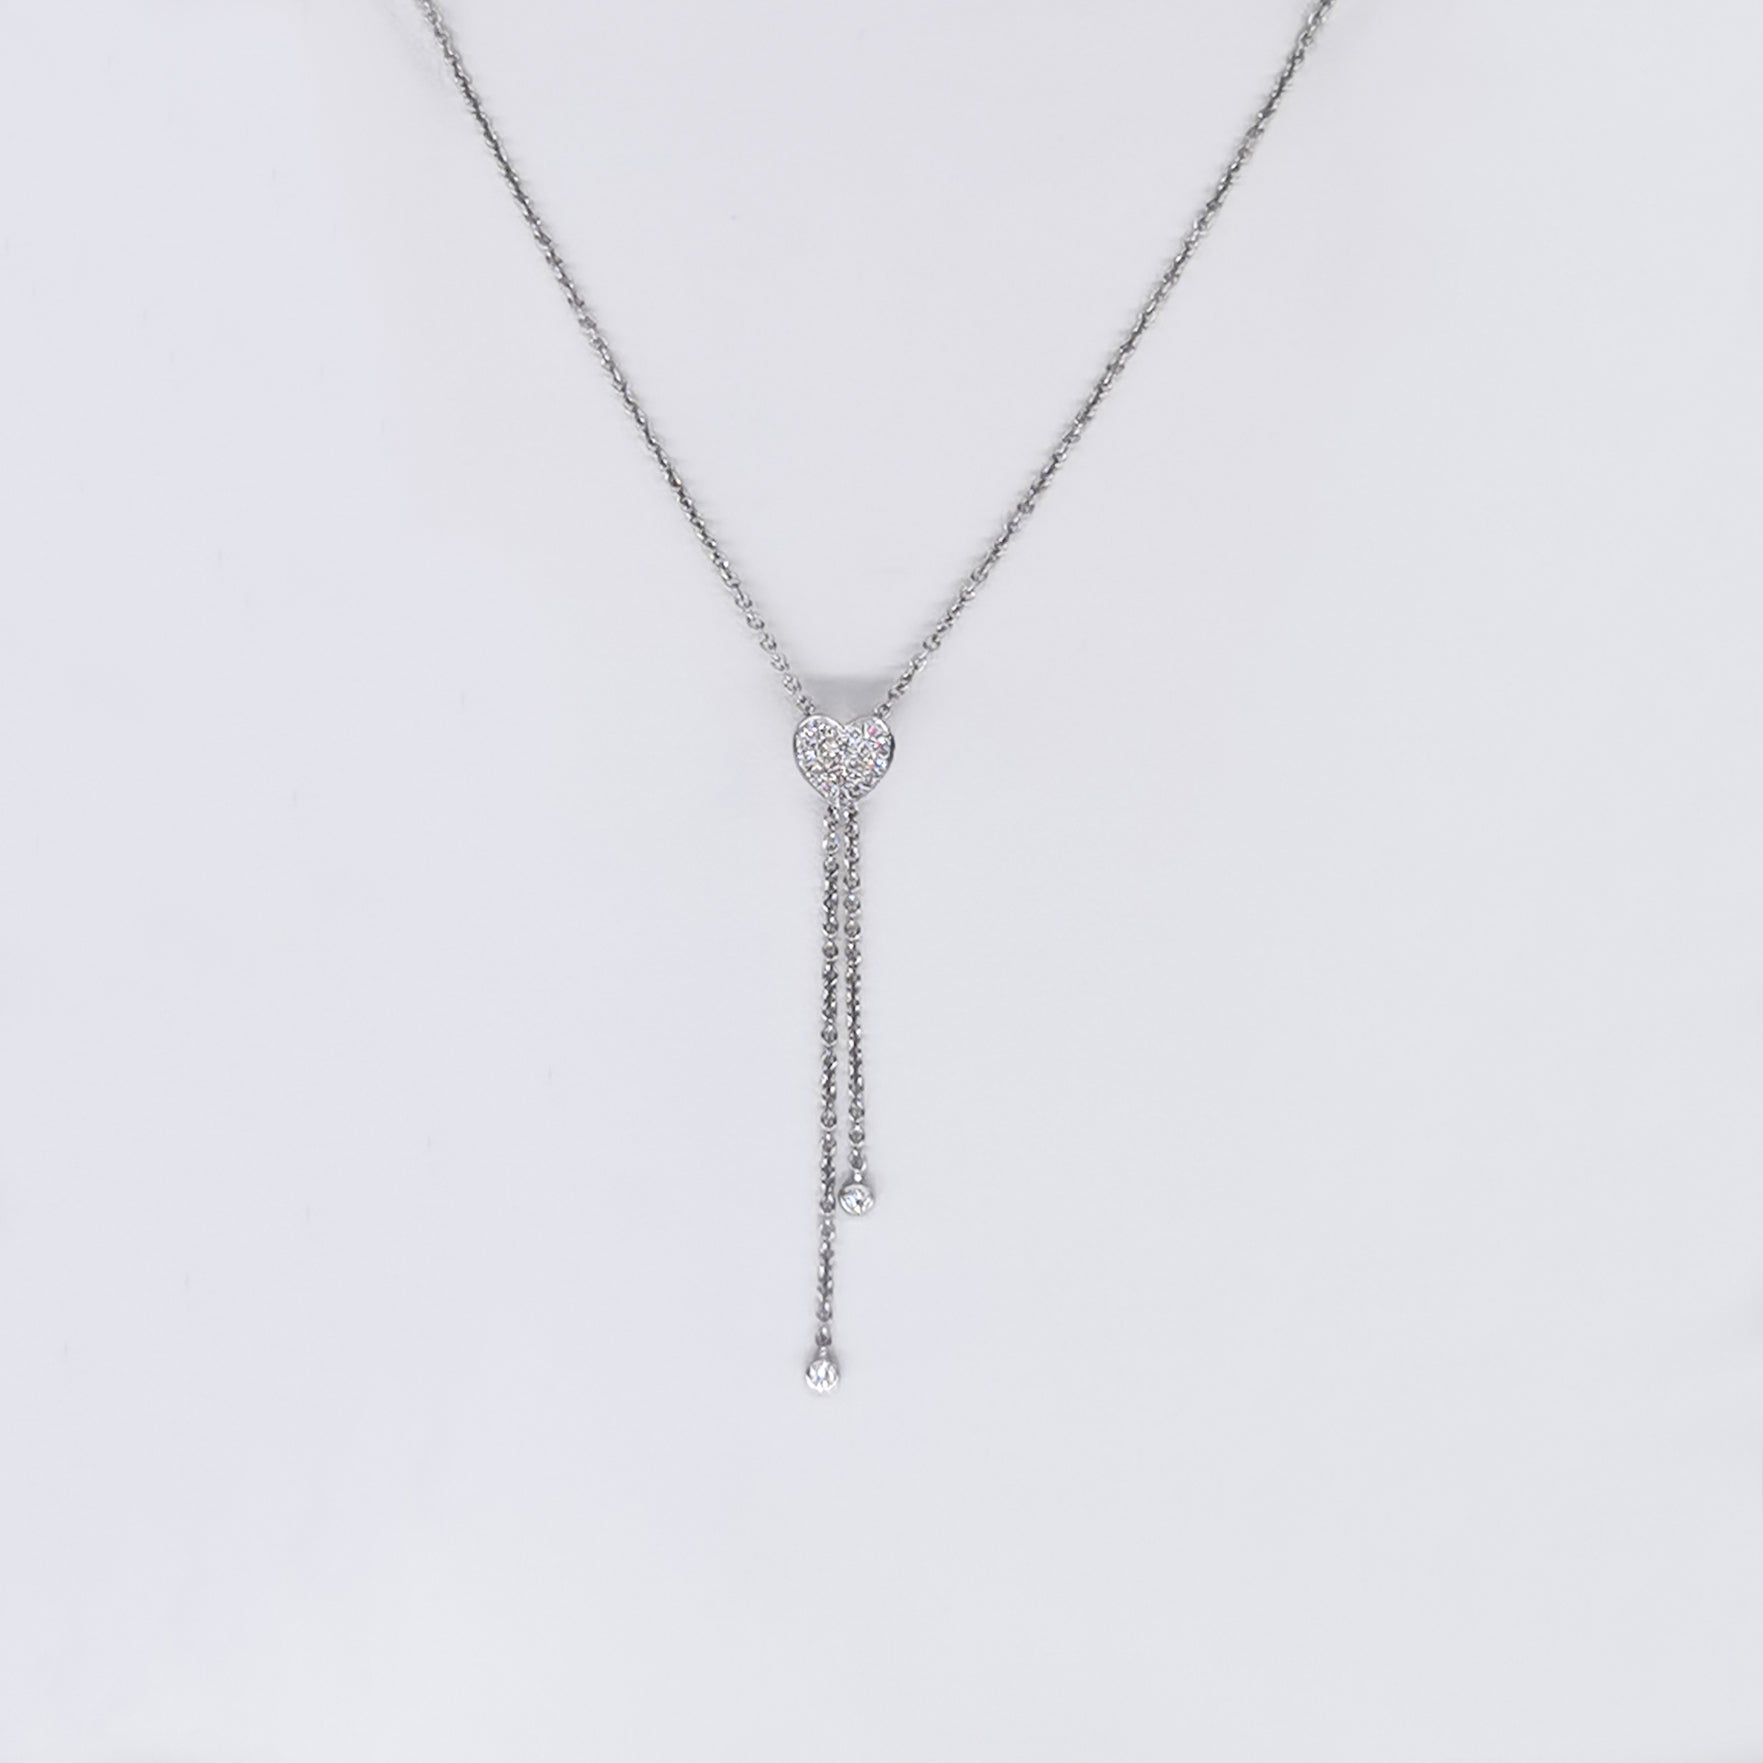 Adjustable Heart Necklace with Diamonds